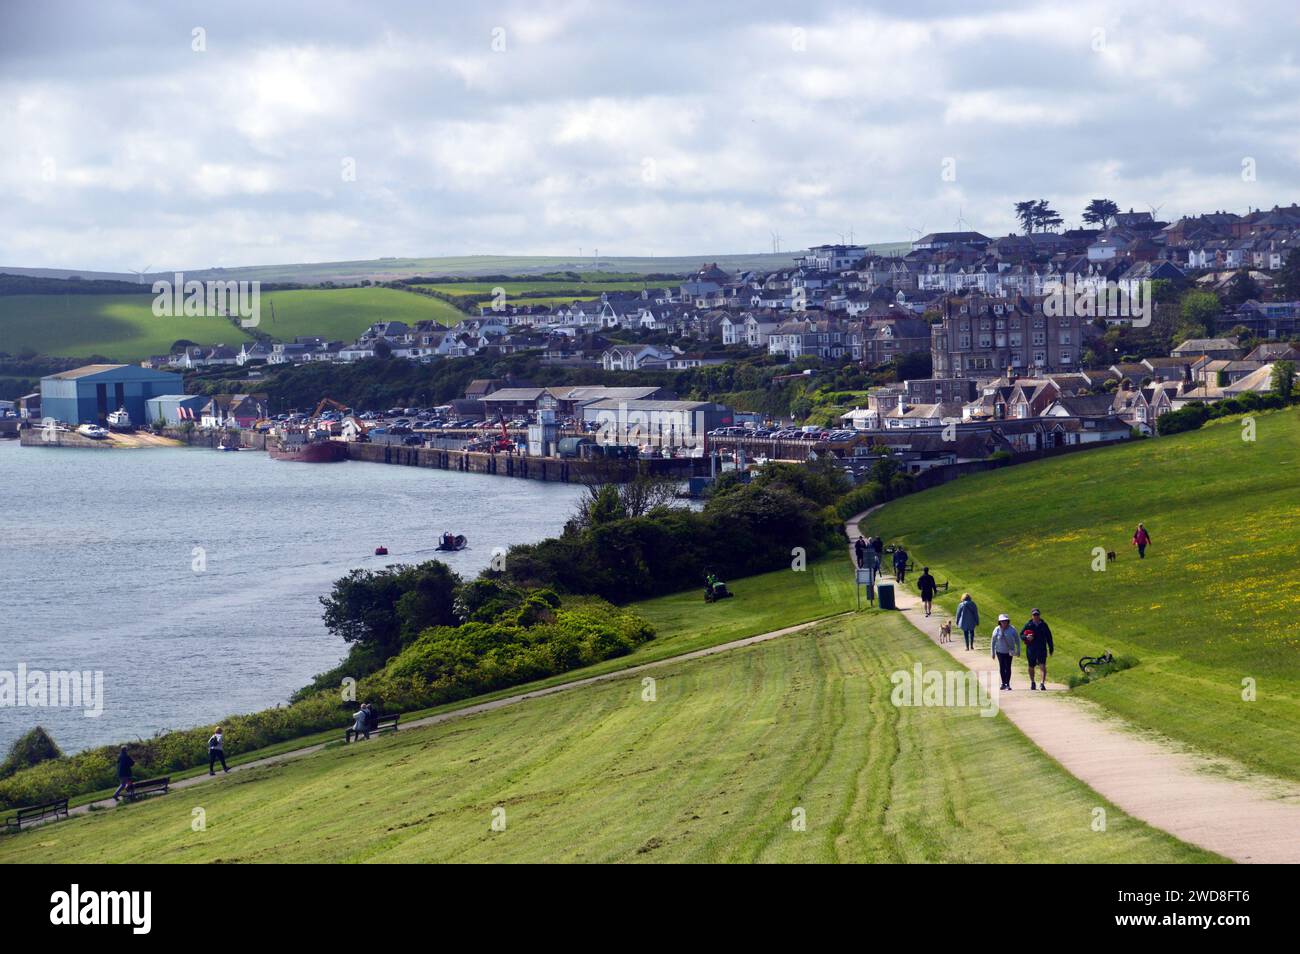 People Walking on South West Coastal Path from the Harbour of the Tourist/Fishing Town of Padstow in Cornwall, England, UK. Stock Photo